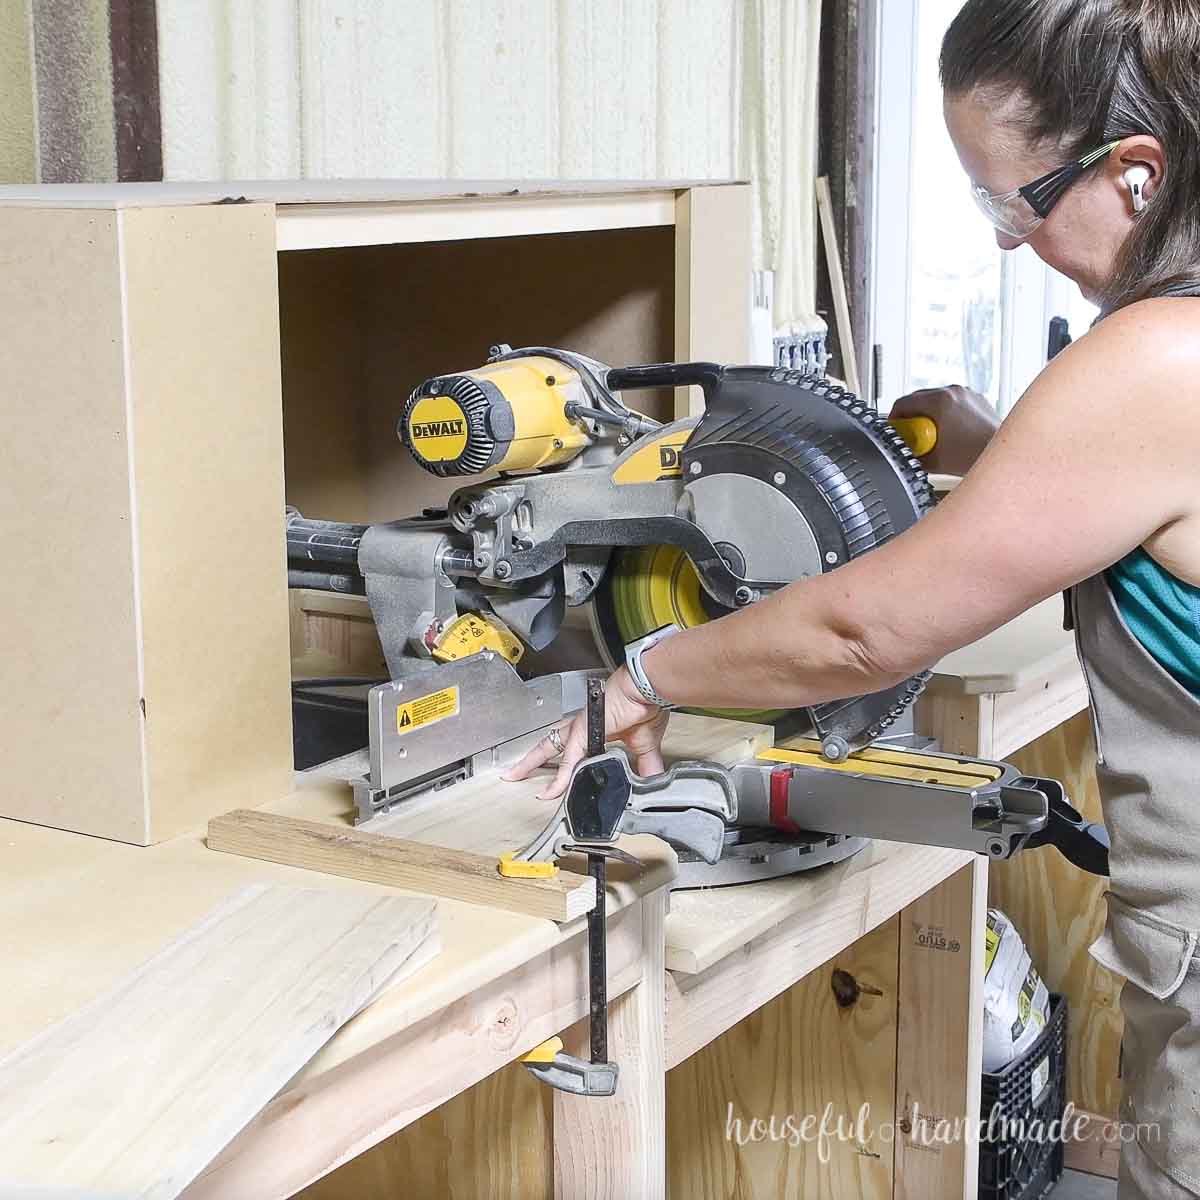 Cutting boards on a miter saw using a scrap wood as a stop.